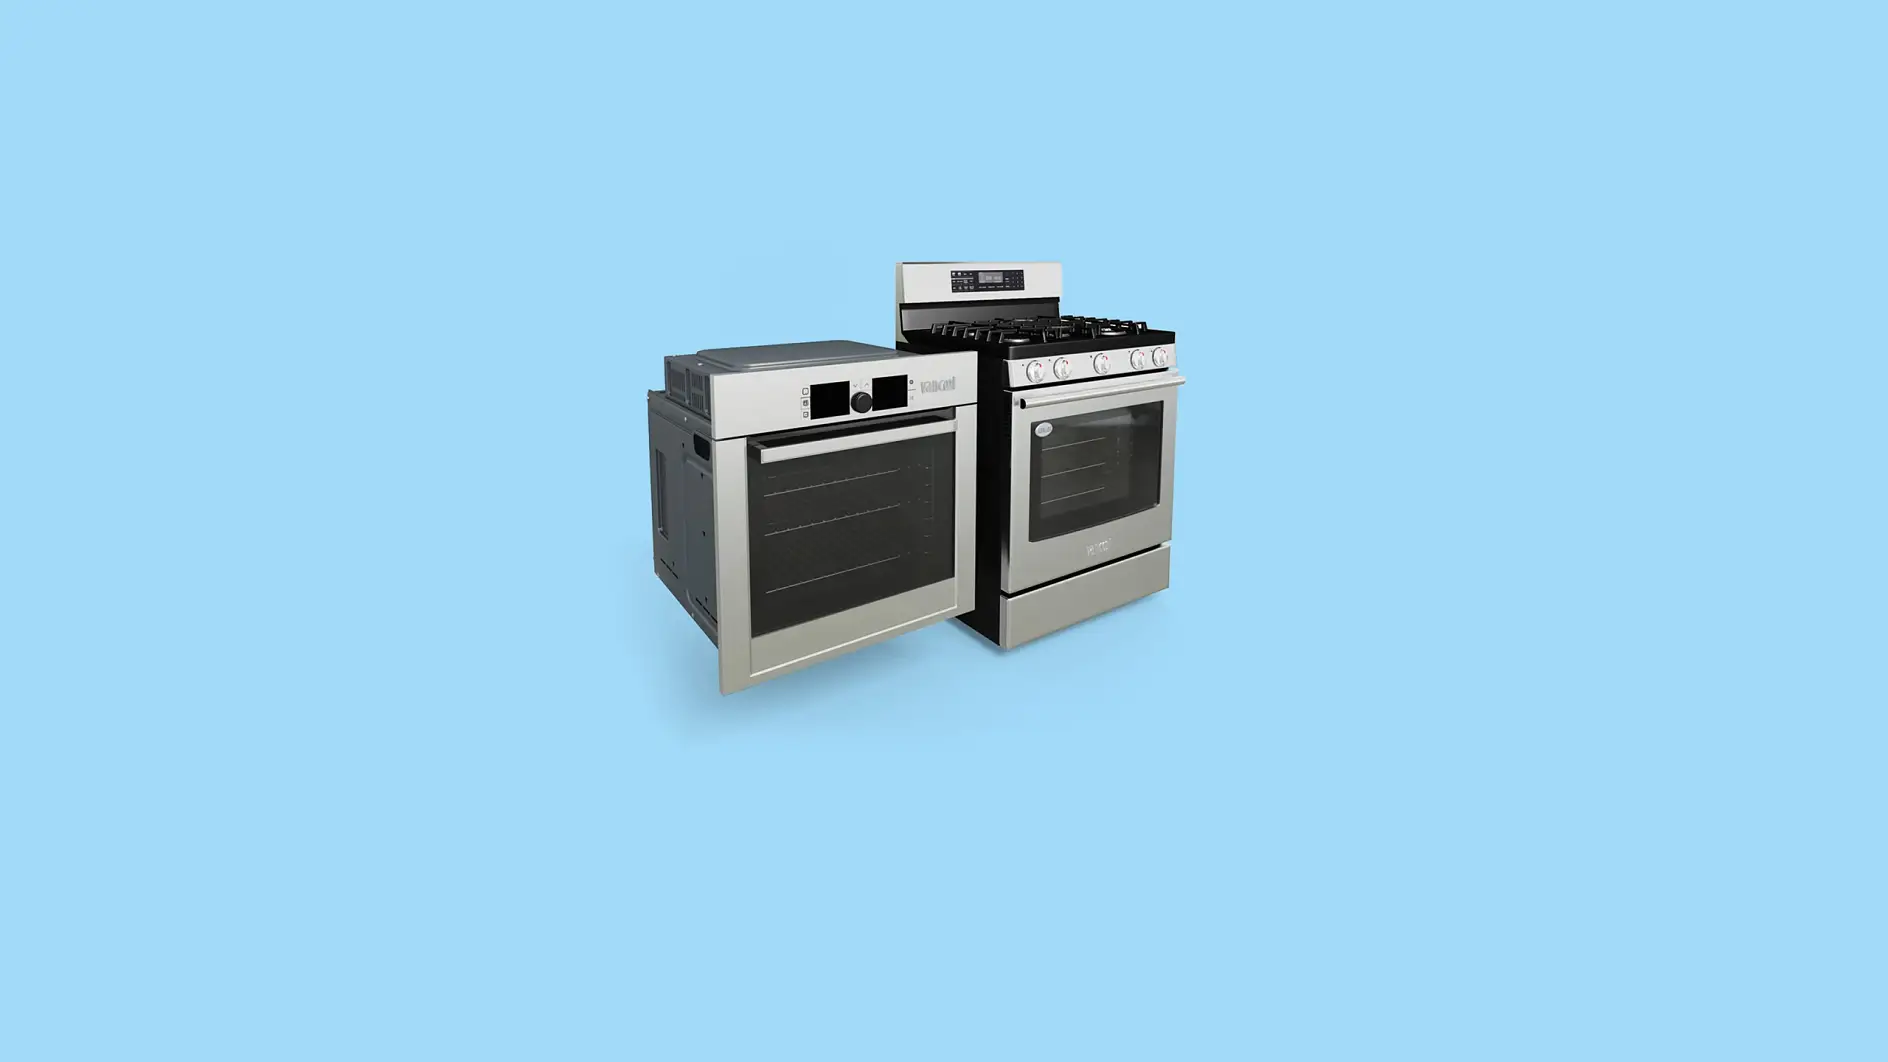 tesa tapes solutions for the appliance market can be reliably and safely applied to modern kitchens, including ovens and cooktops.